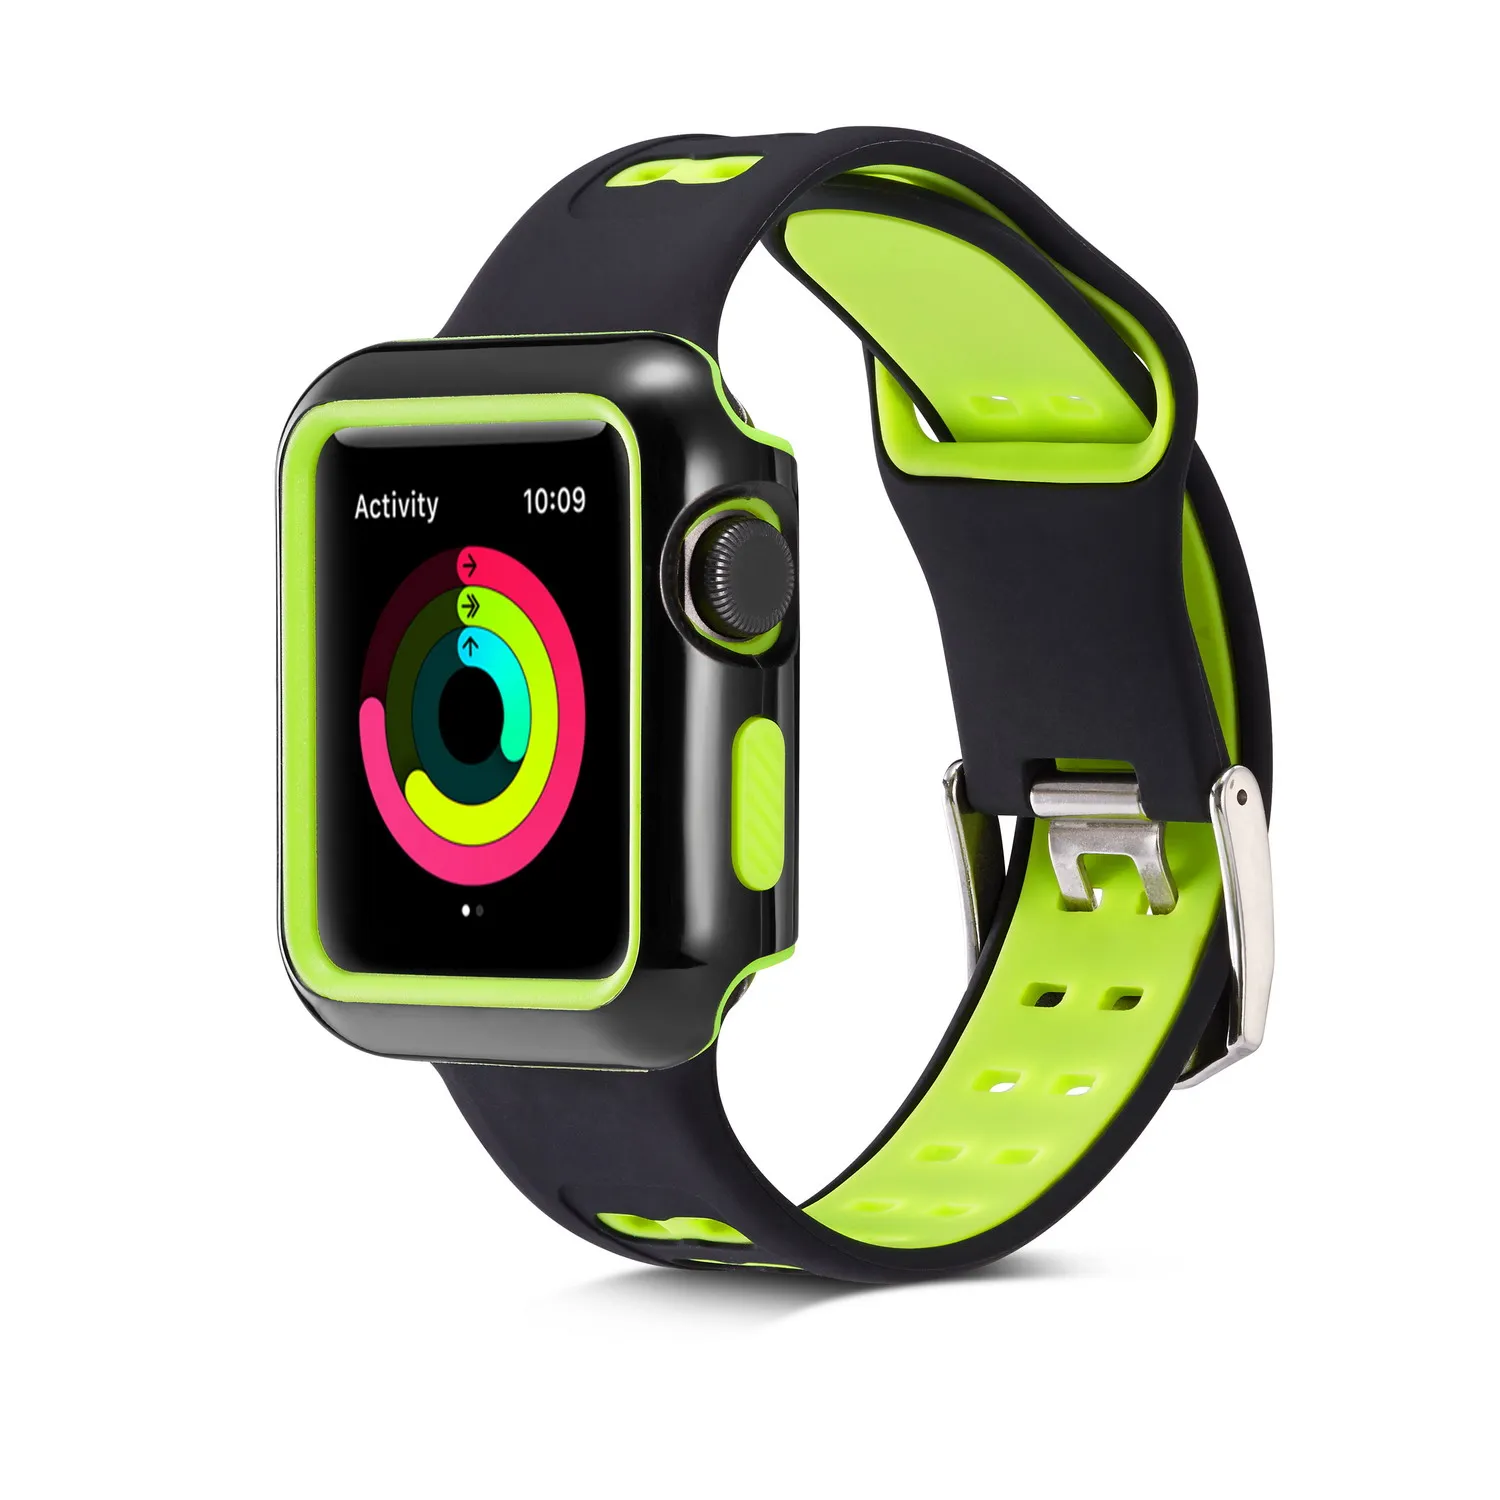 DAHASE Dual Colors Sport Silicone Strap for Apple Watch Band Series 1/2/3 Protect Cover for Apple Watch Case 42mm 38mm Bracelet